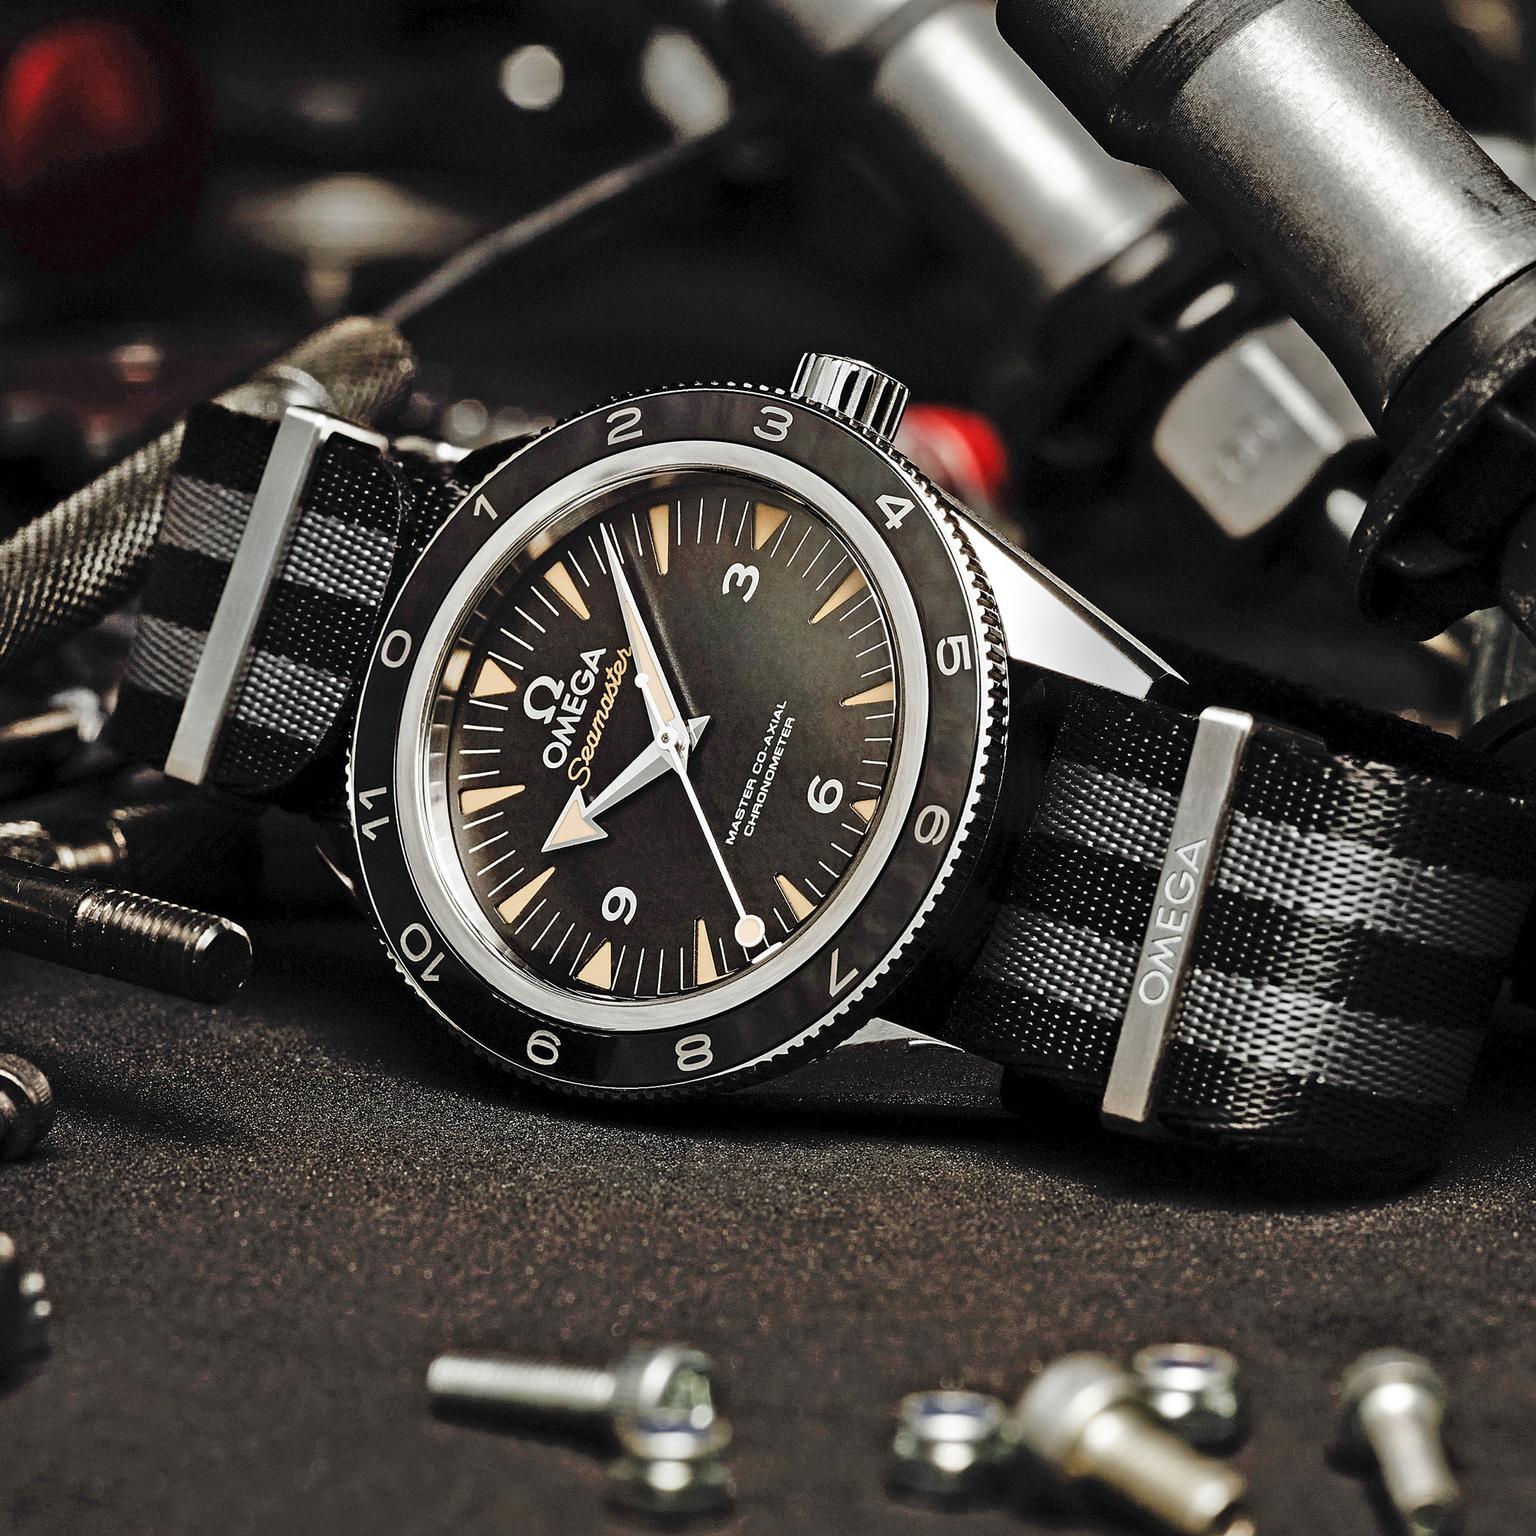 Omega Seamaster 300 Spectre Limited 